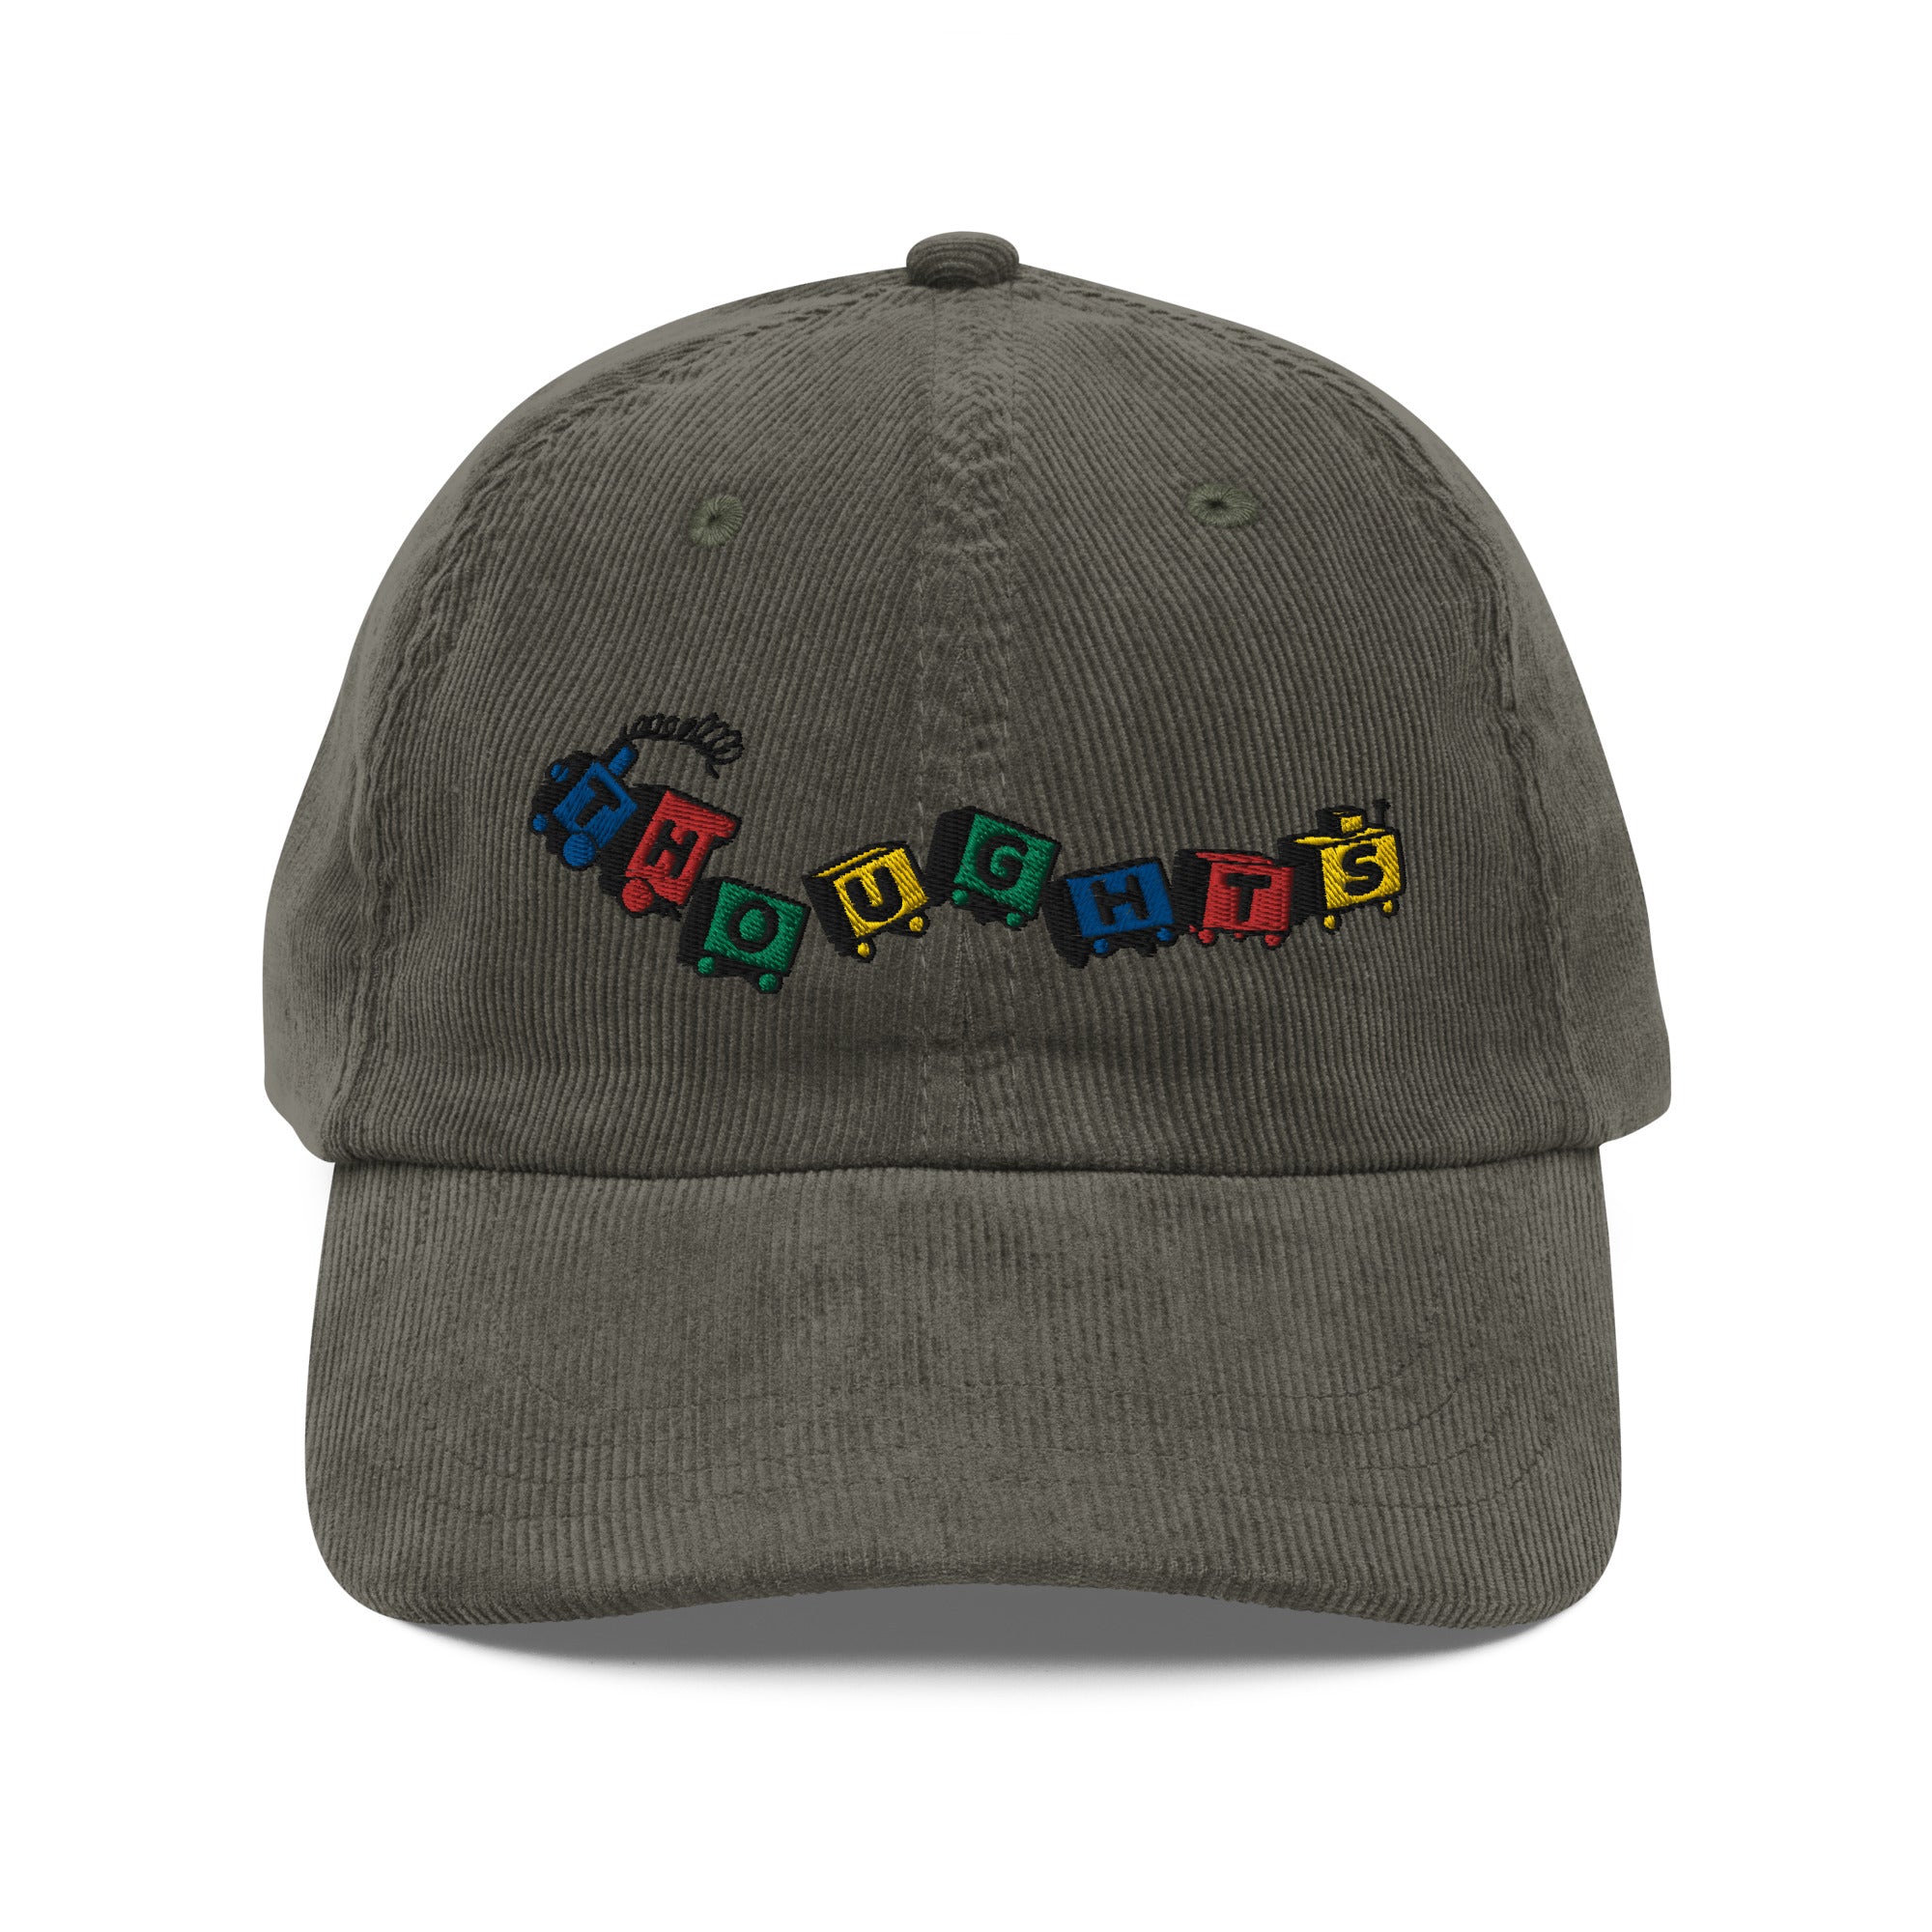 Train of Thought(s) Embroidered Corduroy Hat